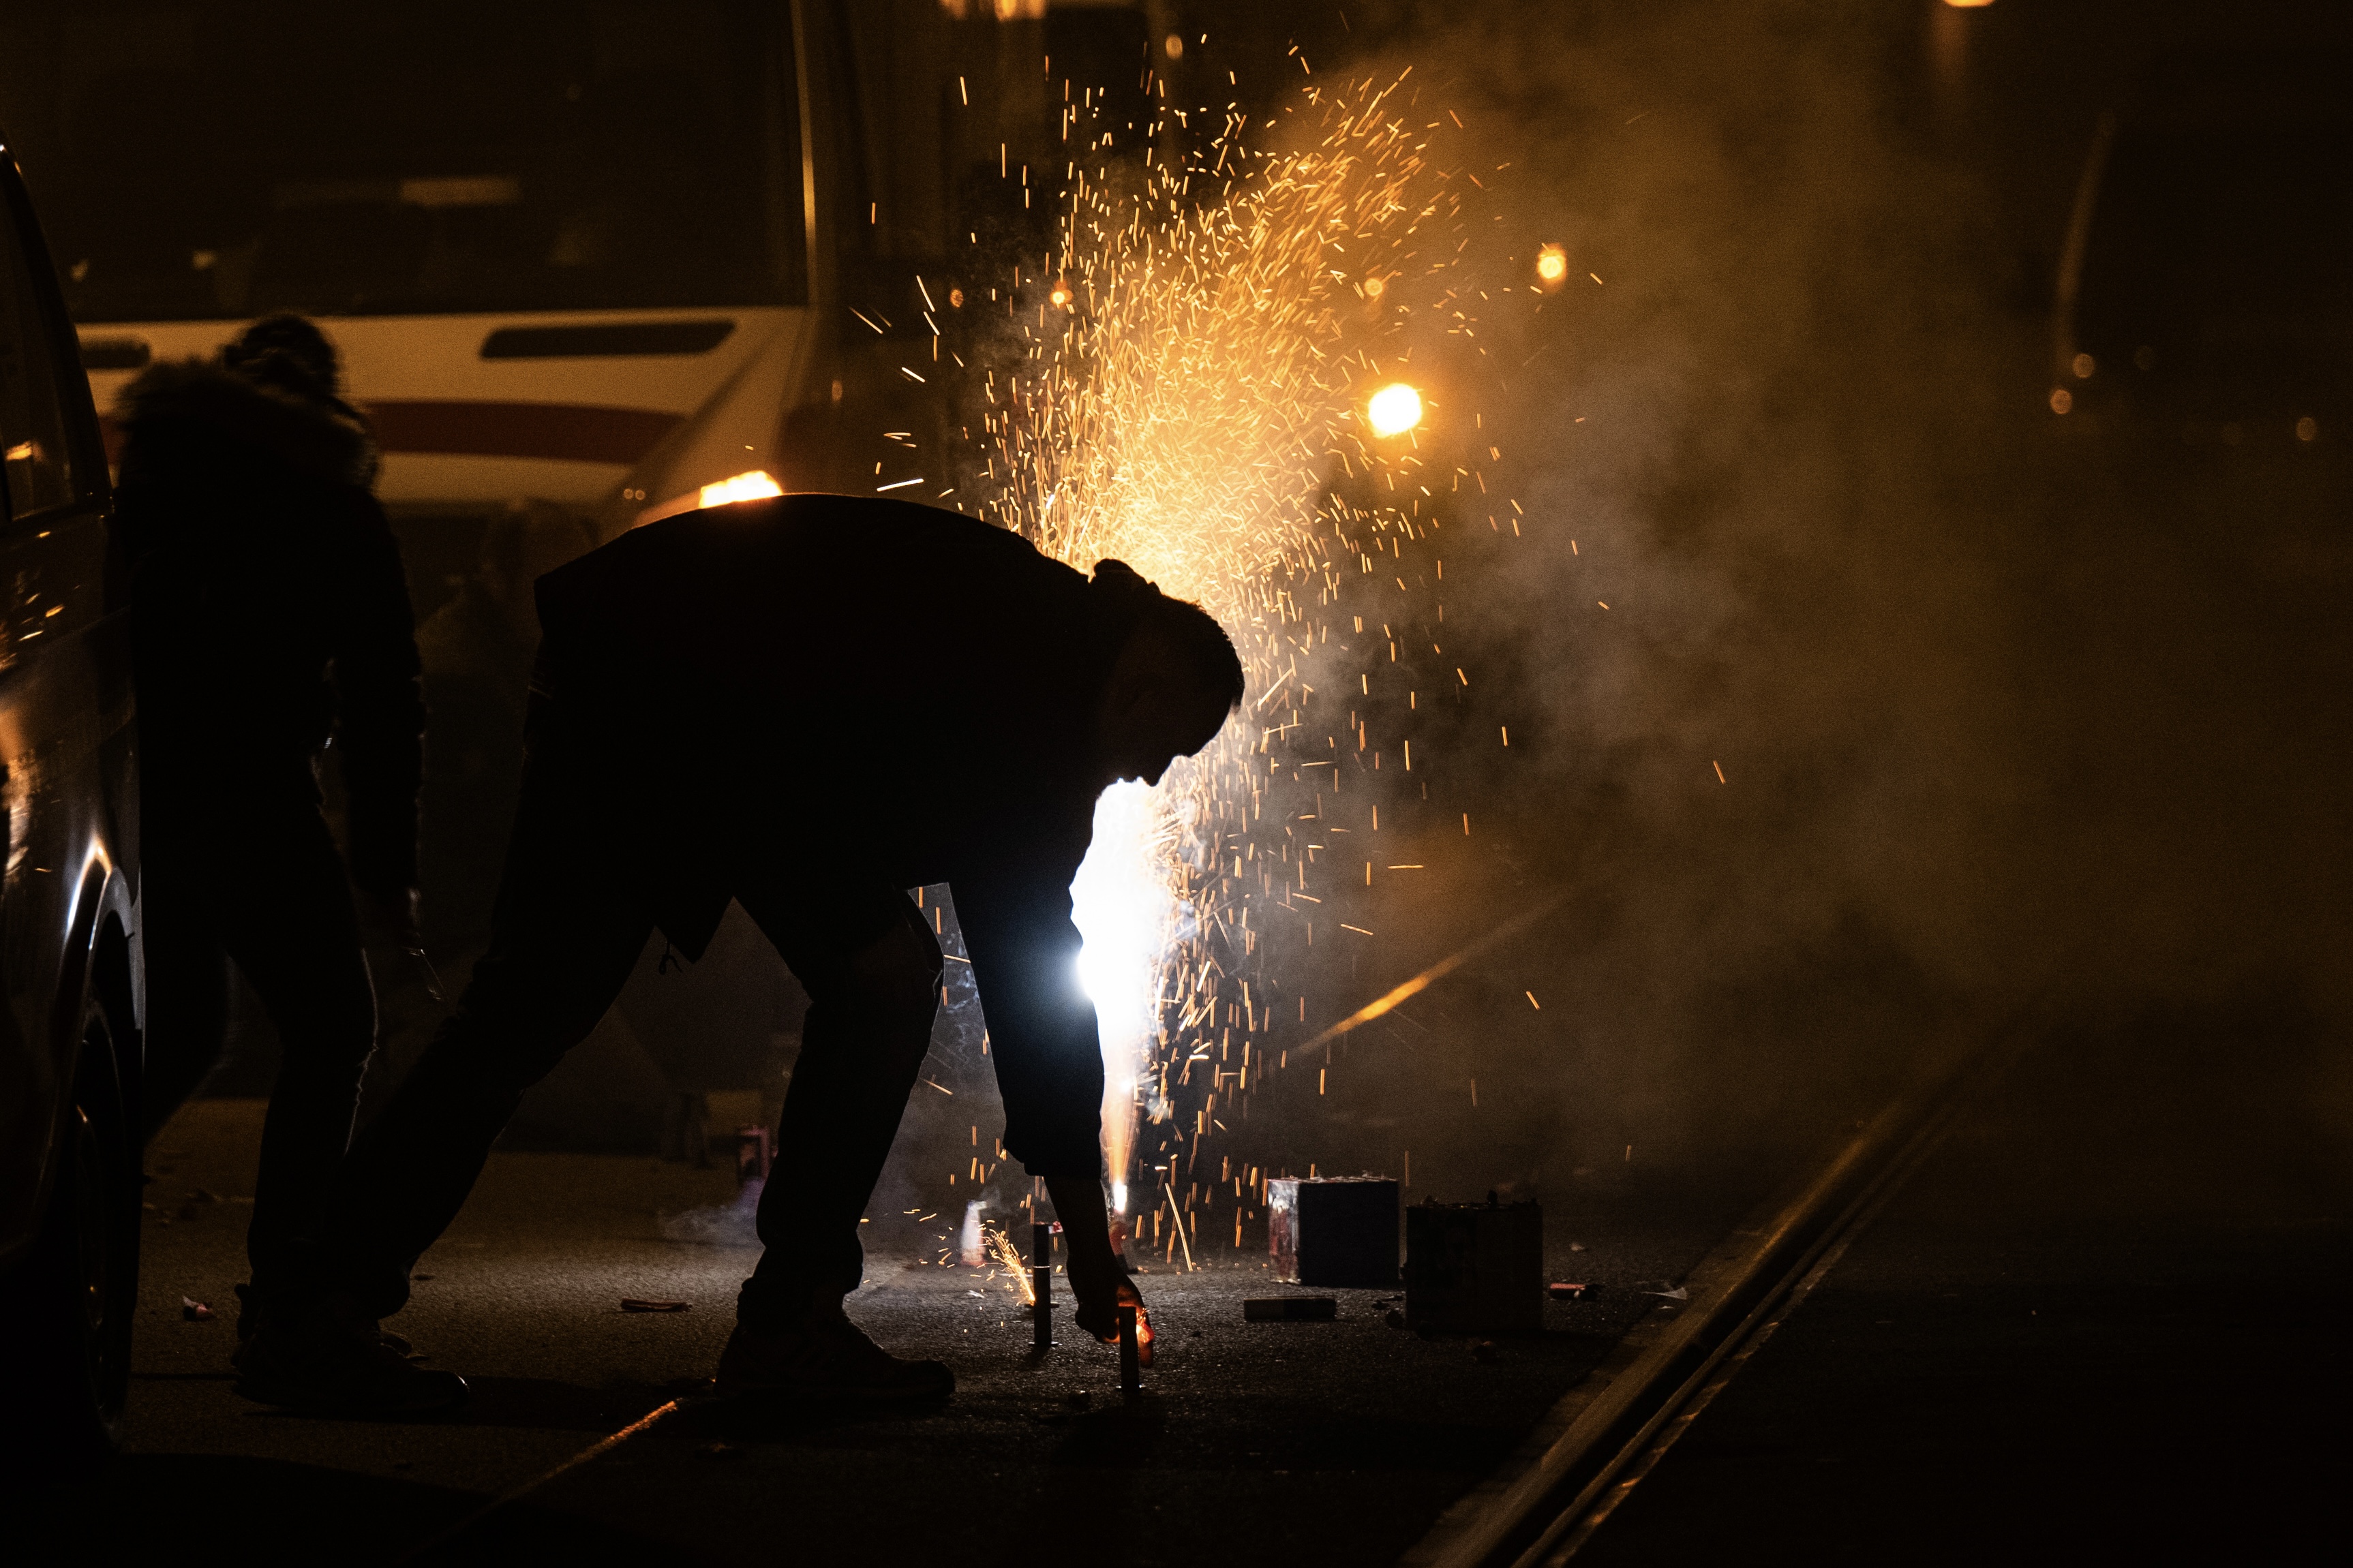 A person bends down to light fireworks in the street at night, with sparks flying and smoke filling the air, illuminating the otherwise dark surroundings.